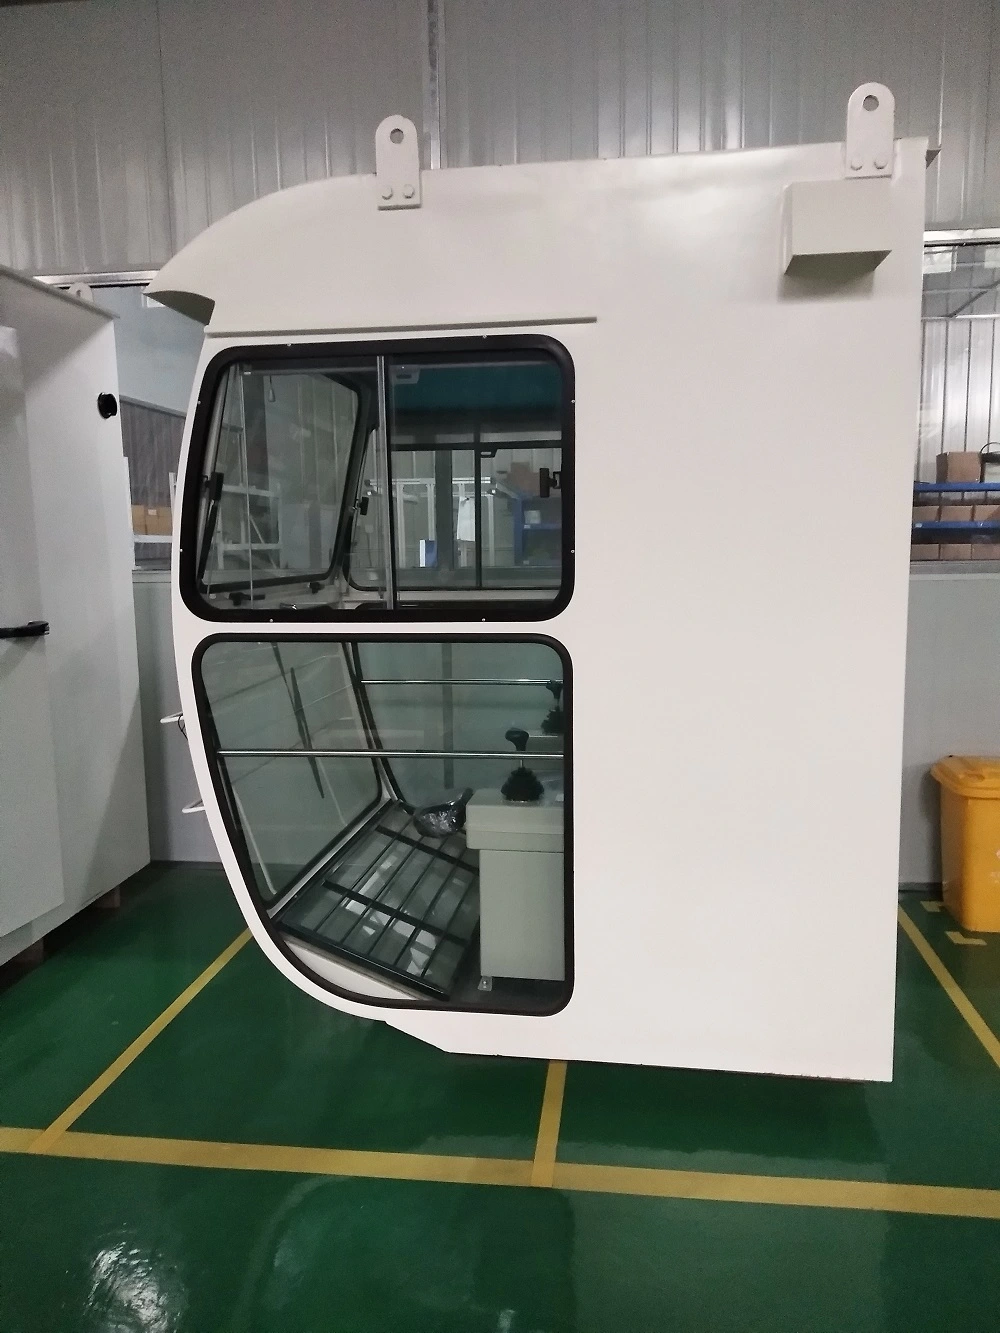 Ntc Model Crane Cabin for Overhead Crane Control with The Advantage of Low Cost